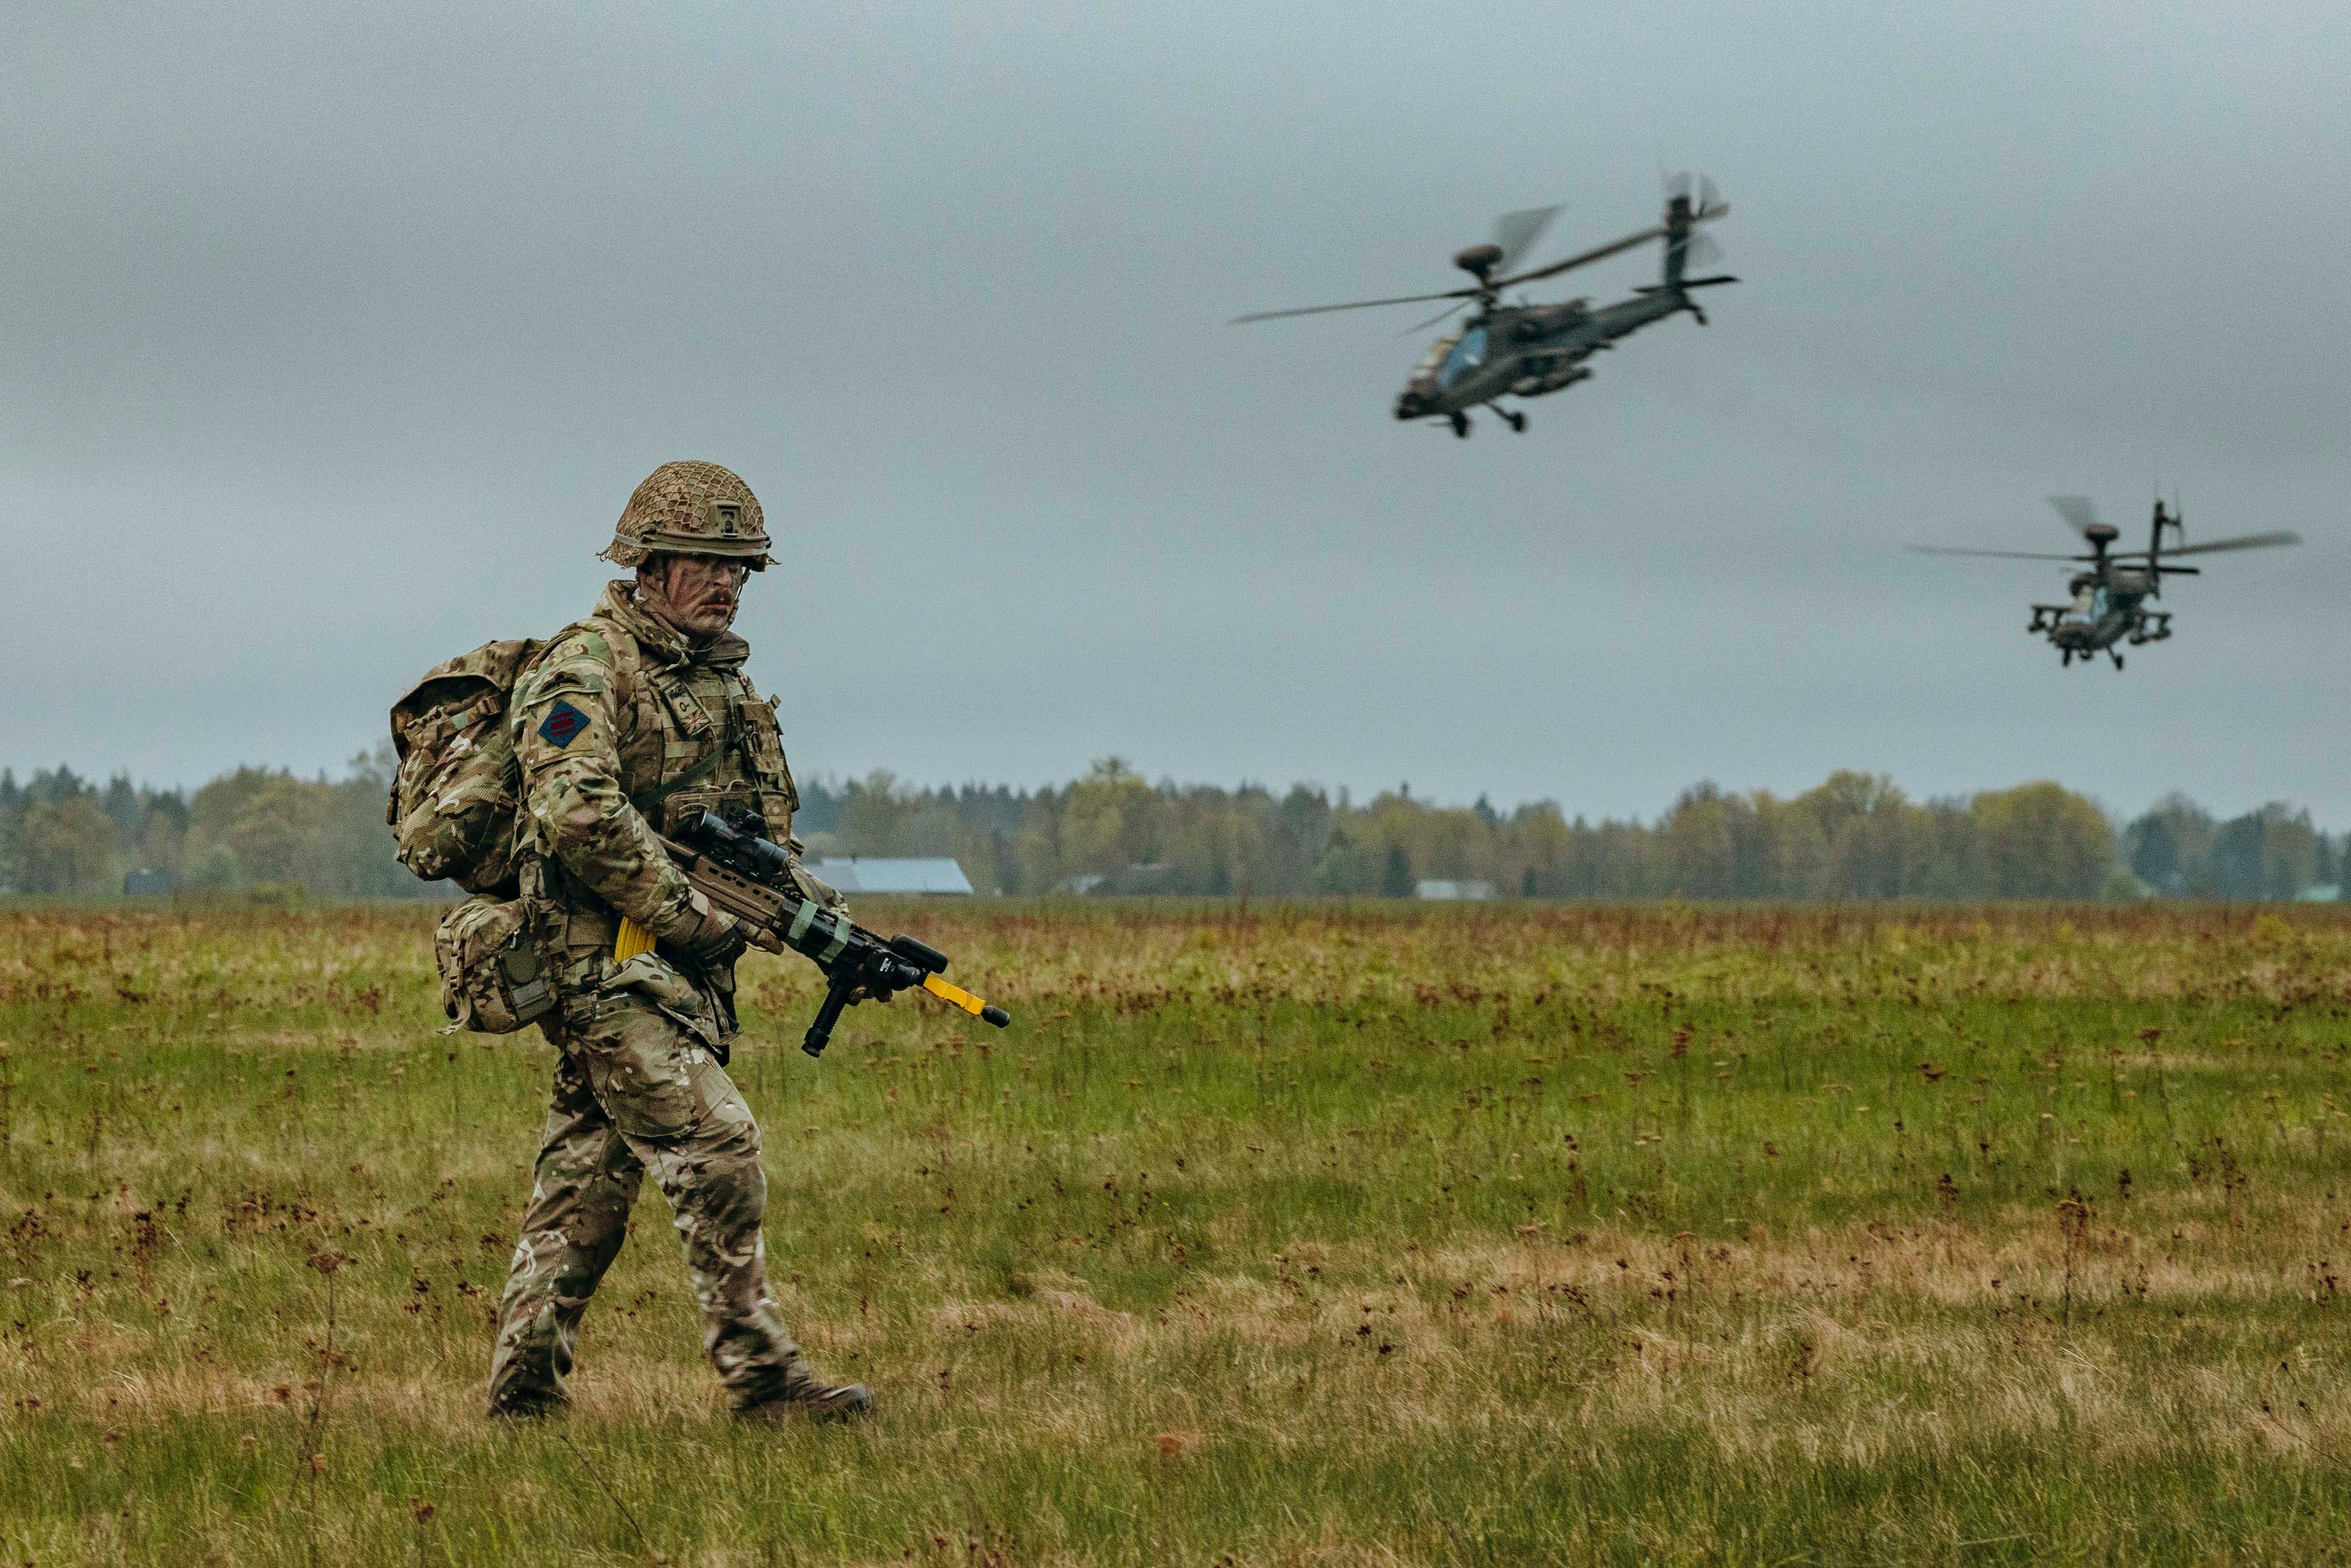 british forces lead dramatic war game in estonia as nato seeks to counter russia threat: ‘we are ready to fight’